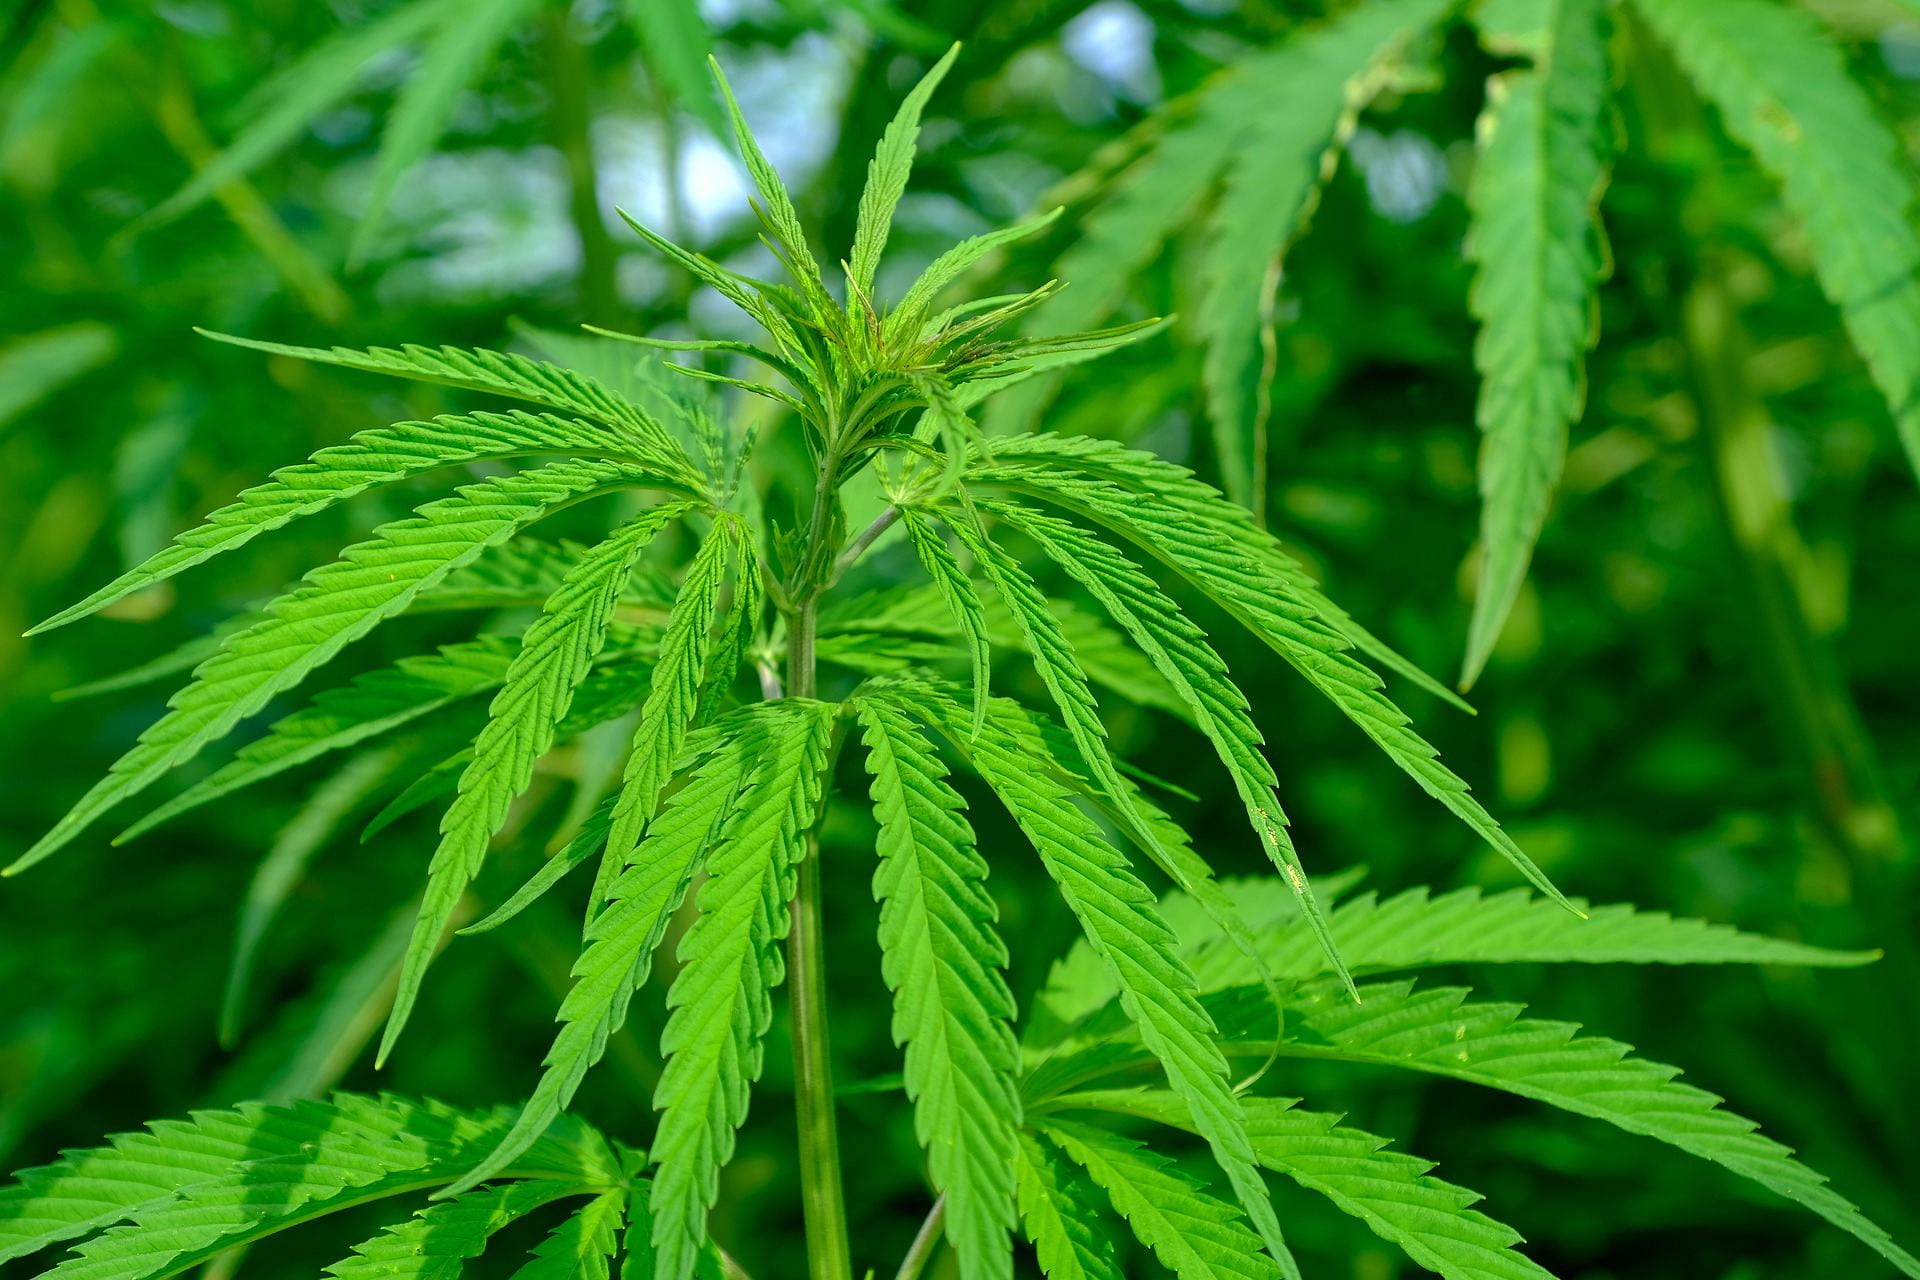 [The image shows Cannabis Sativa plant]